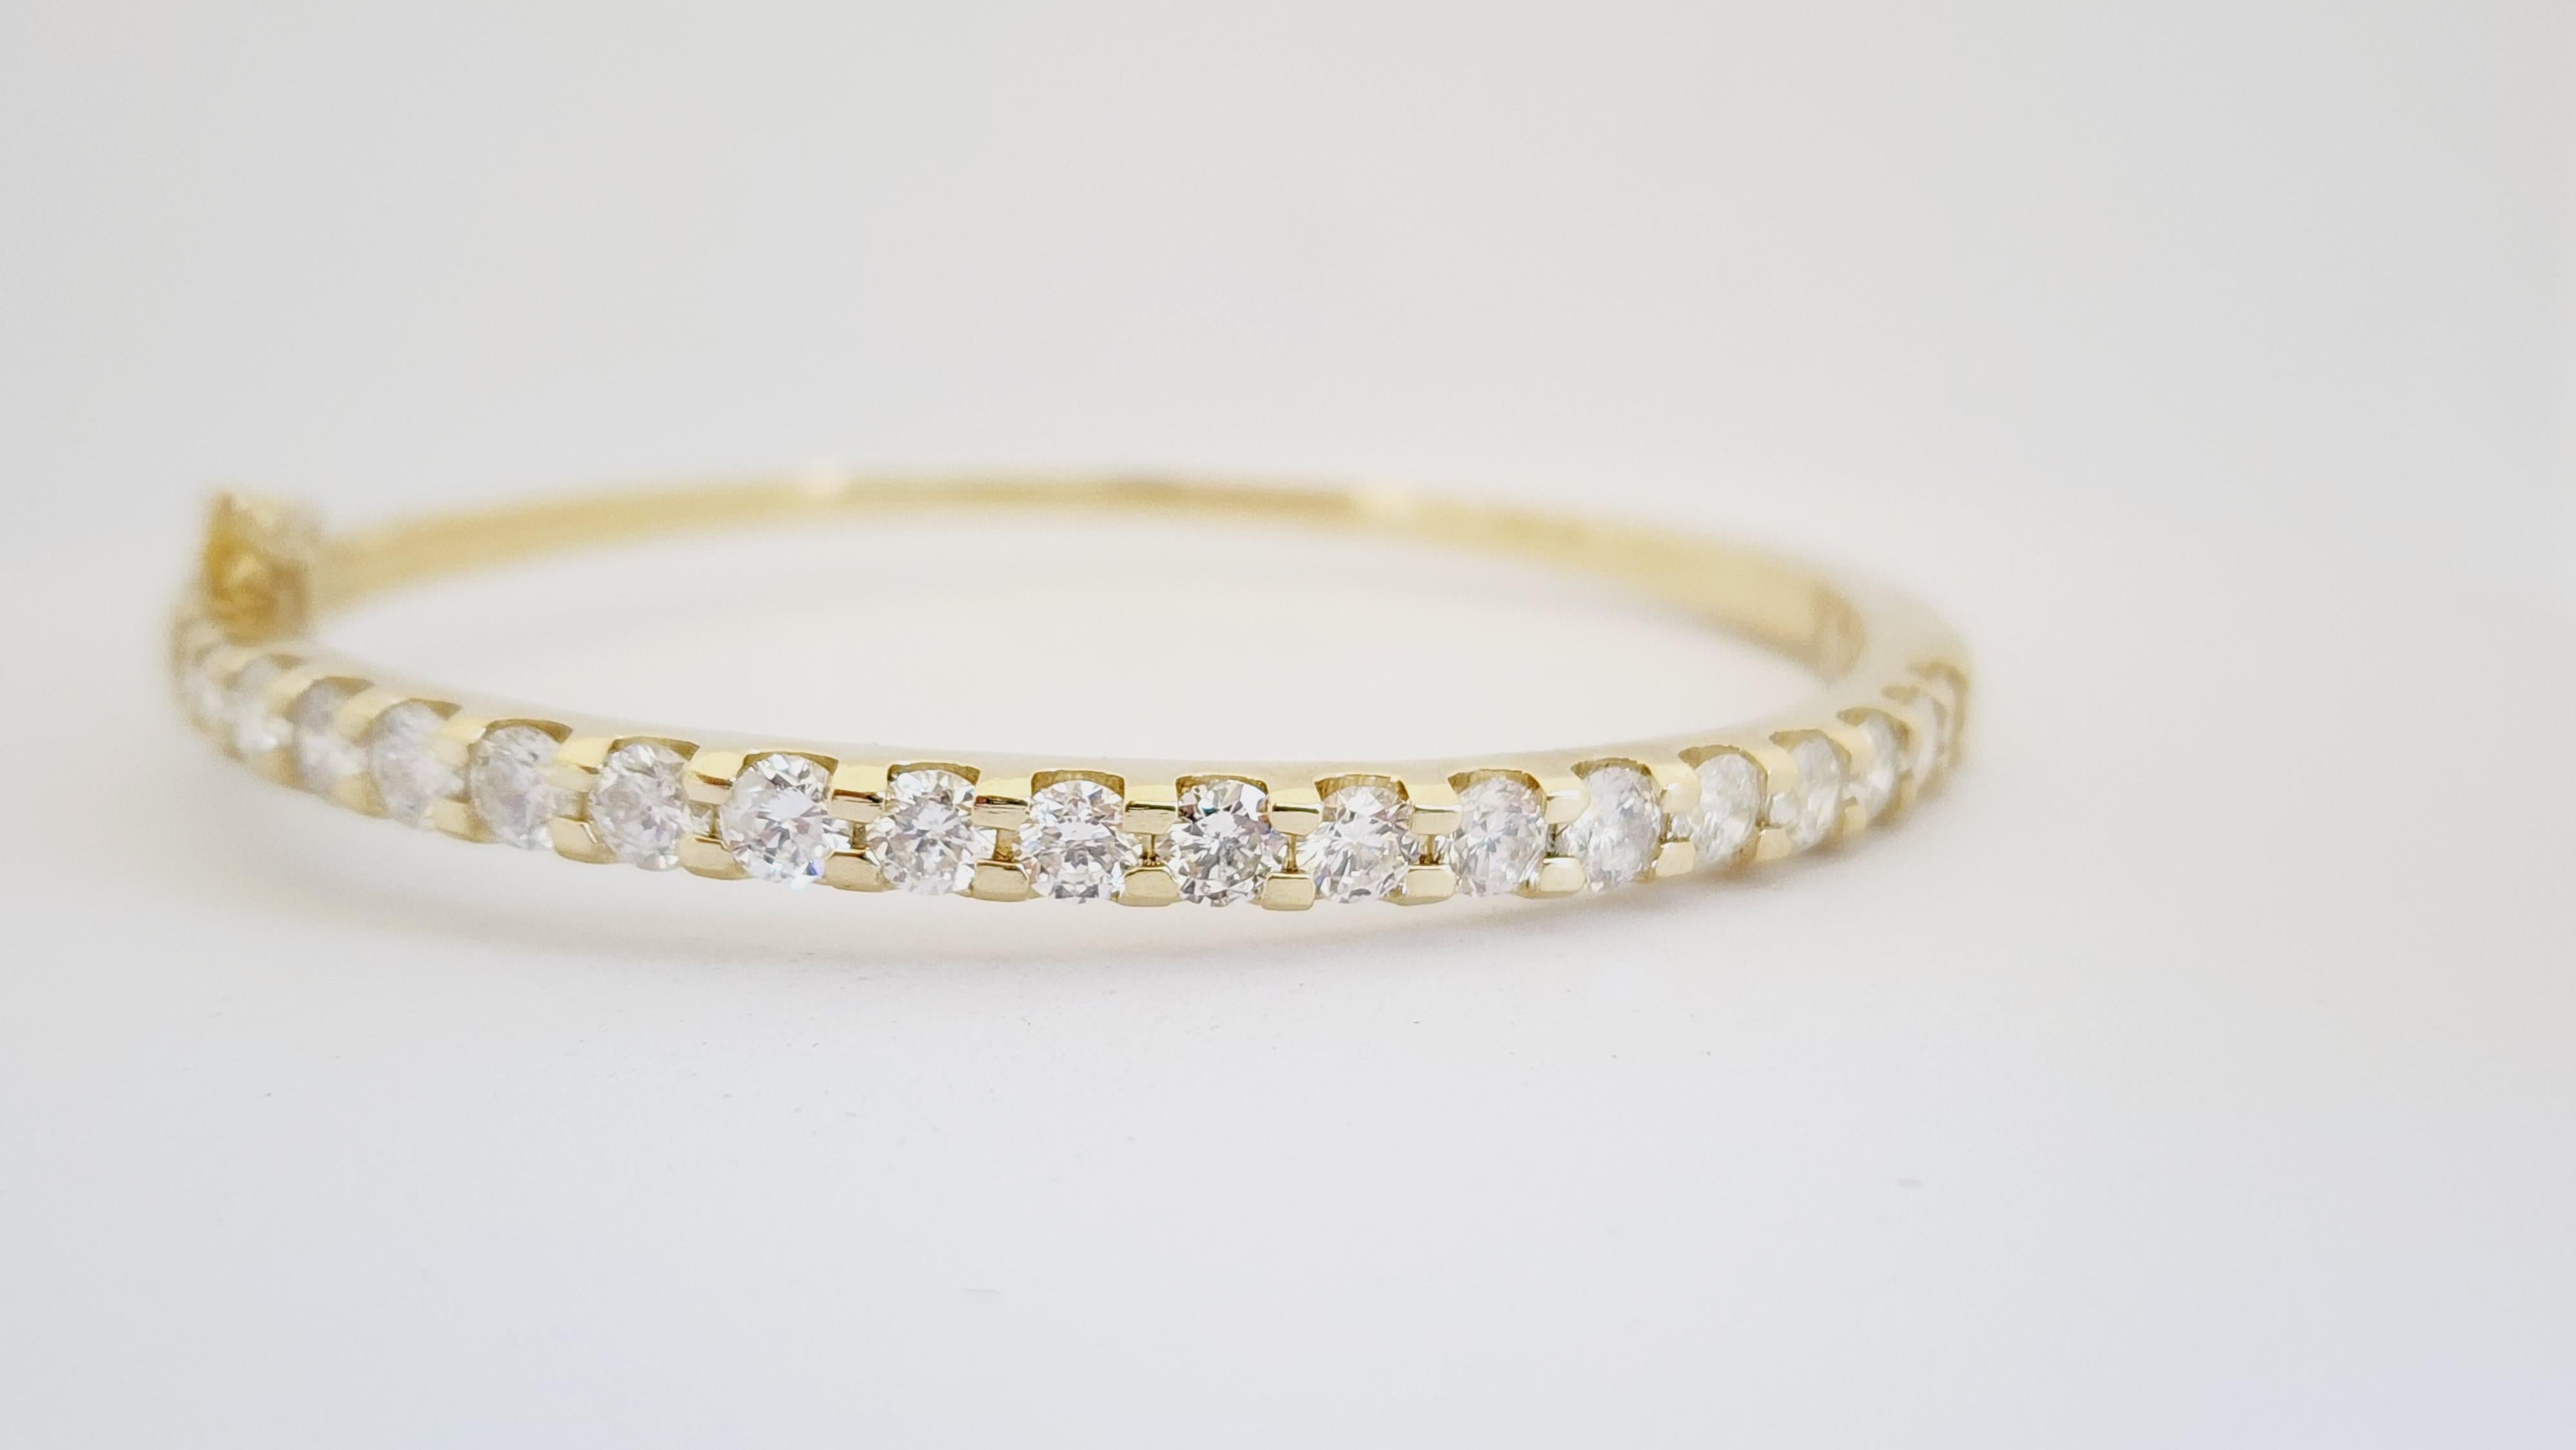 Natural Diamonds 3.90 ctw flexible half way around bangle yellow gold 14k 7 Inch. 
Average Color H Clarity I, 3.8 mm wide.